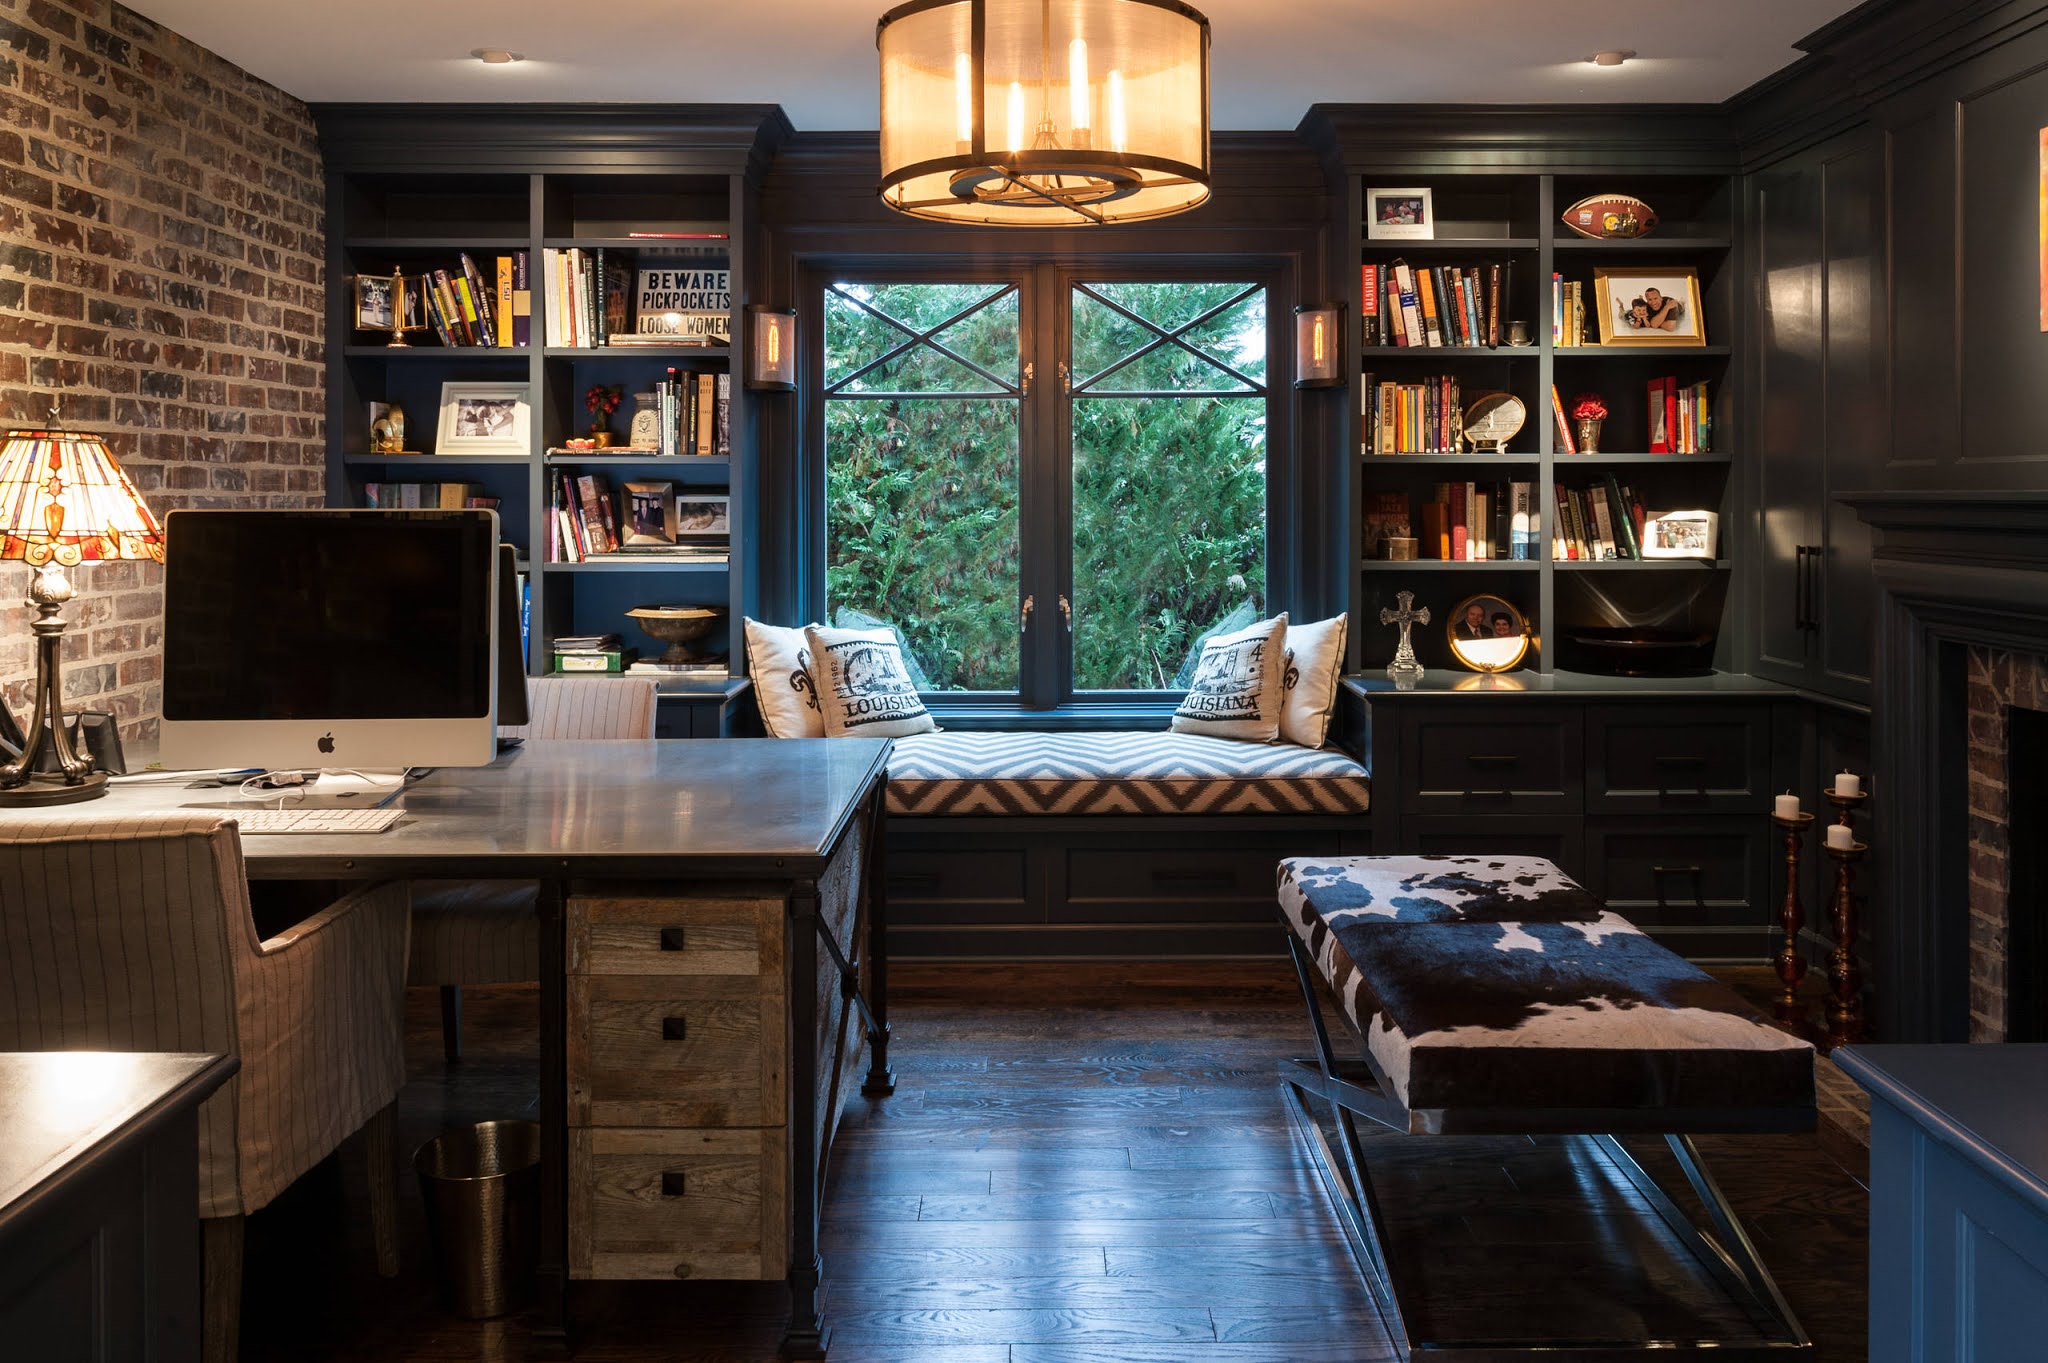 75 Beautiful Study Room Pictures Ideas November 2020 Houzz 